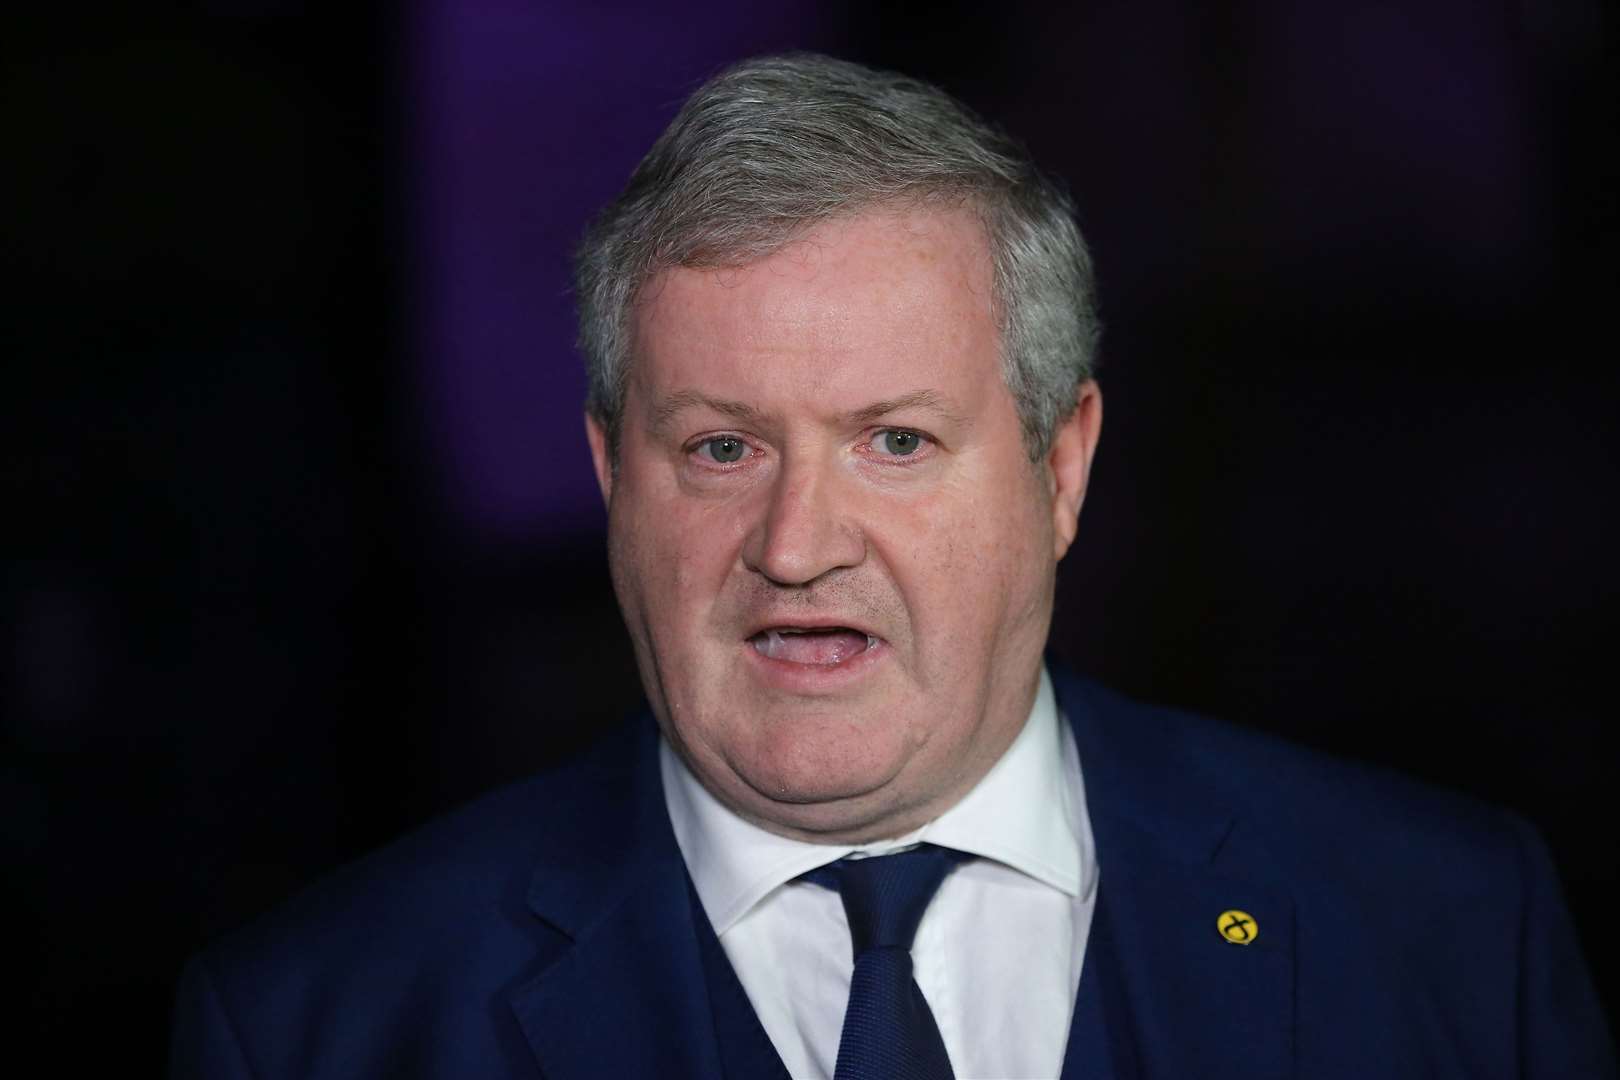 Ian Blackford has called for a judge-led inquiry (Isabel Infantes/PA)